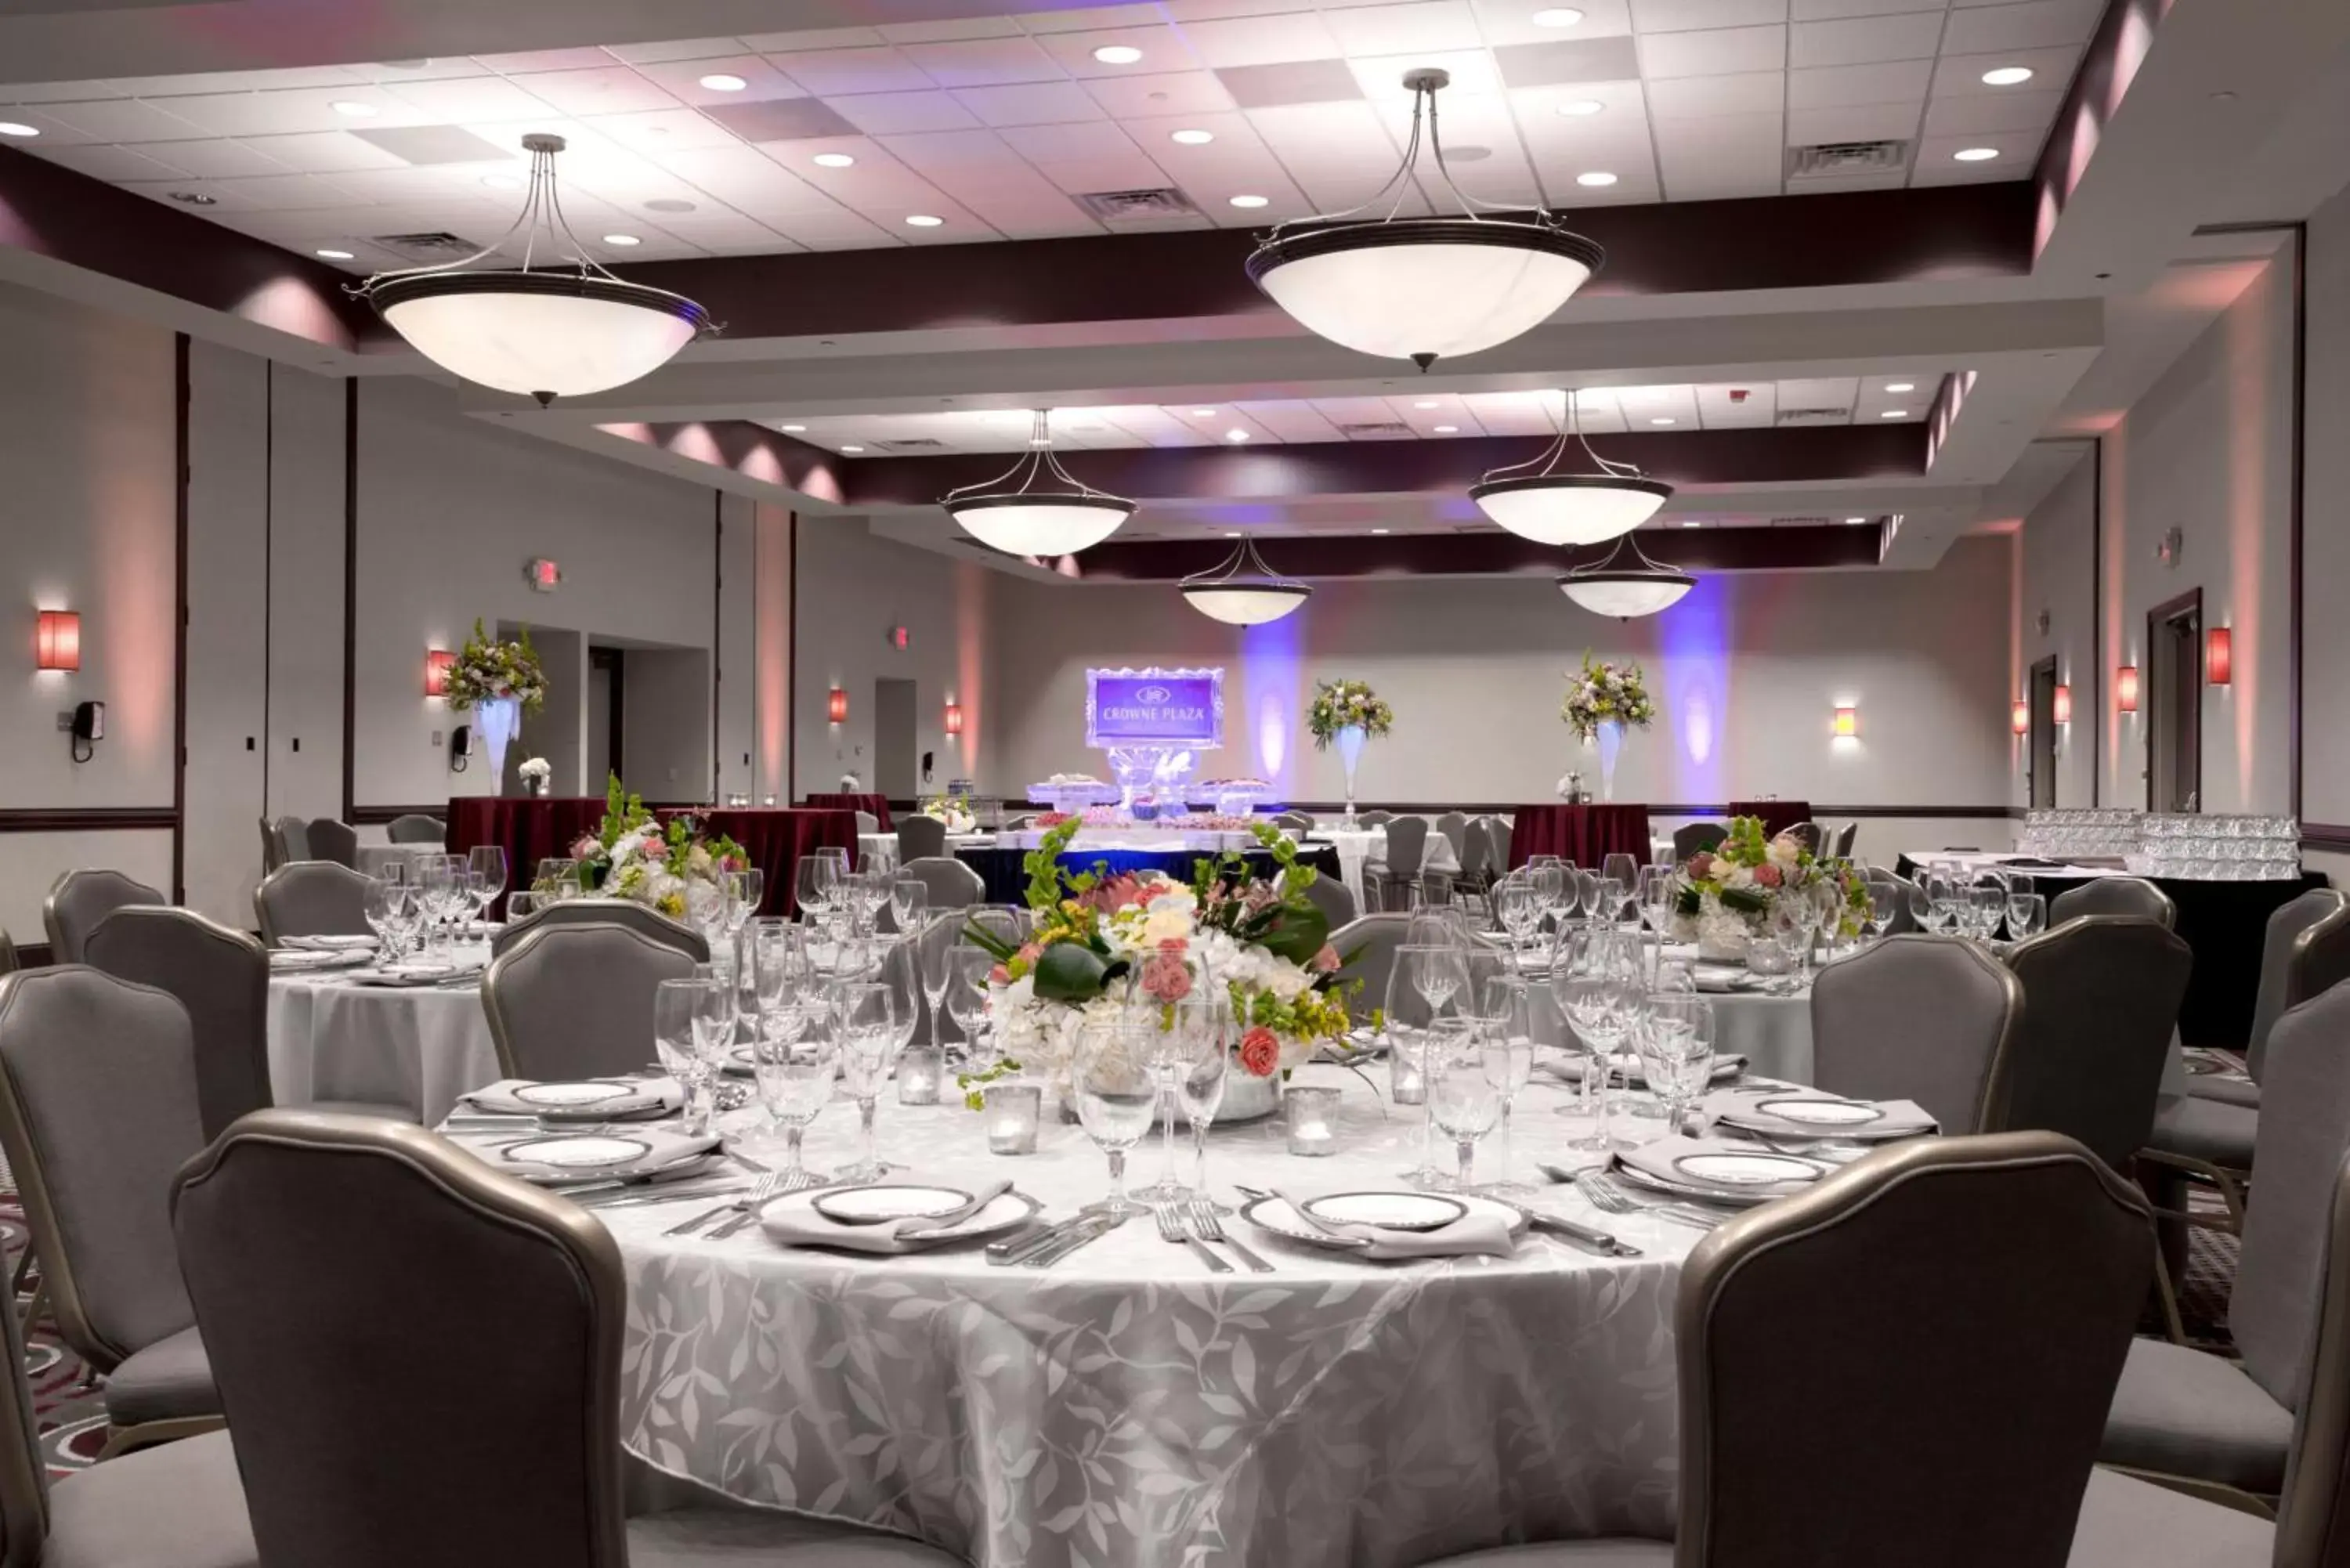 Banquet/Function facilities, Banquet Facilities in Crowne Plaza Greenville, an IHG Hotel